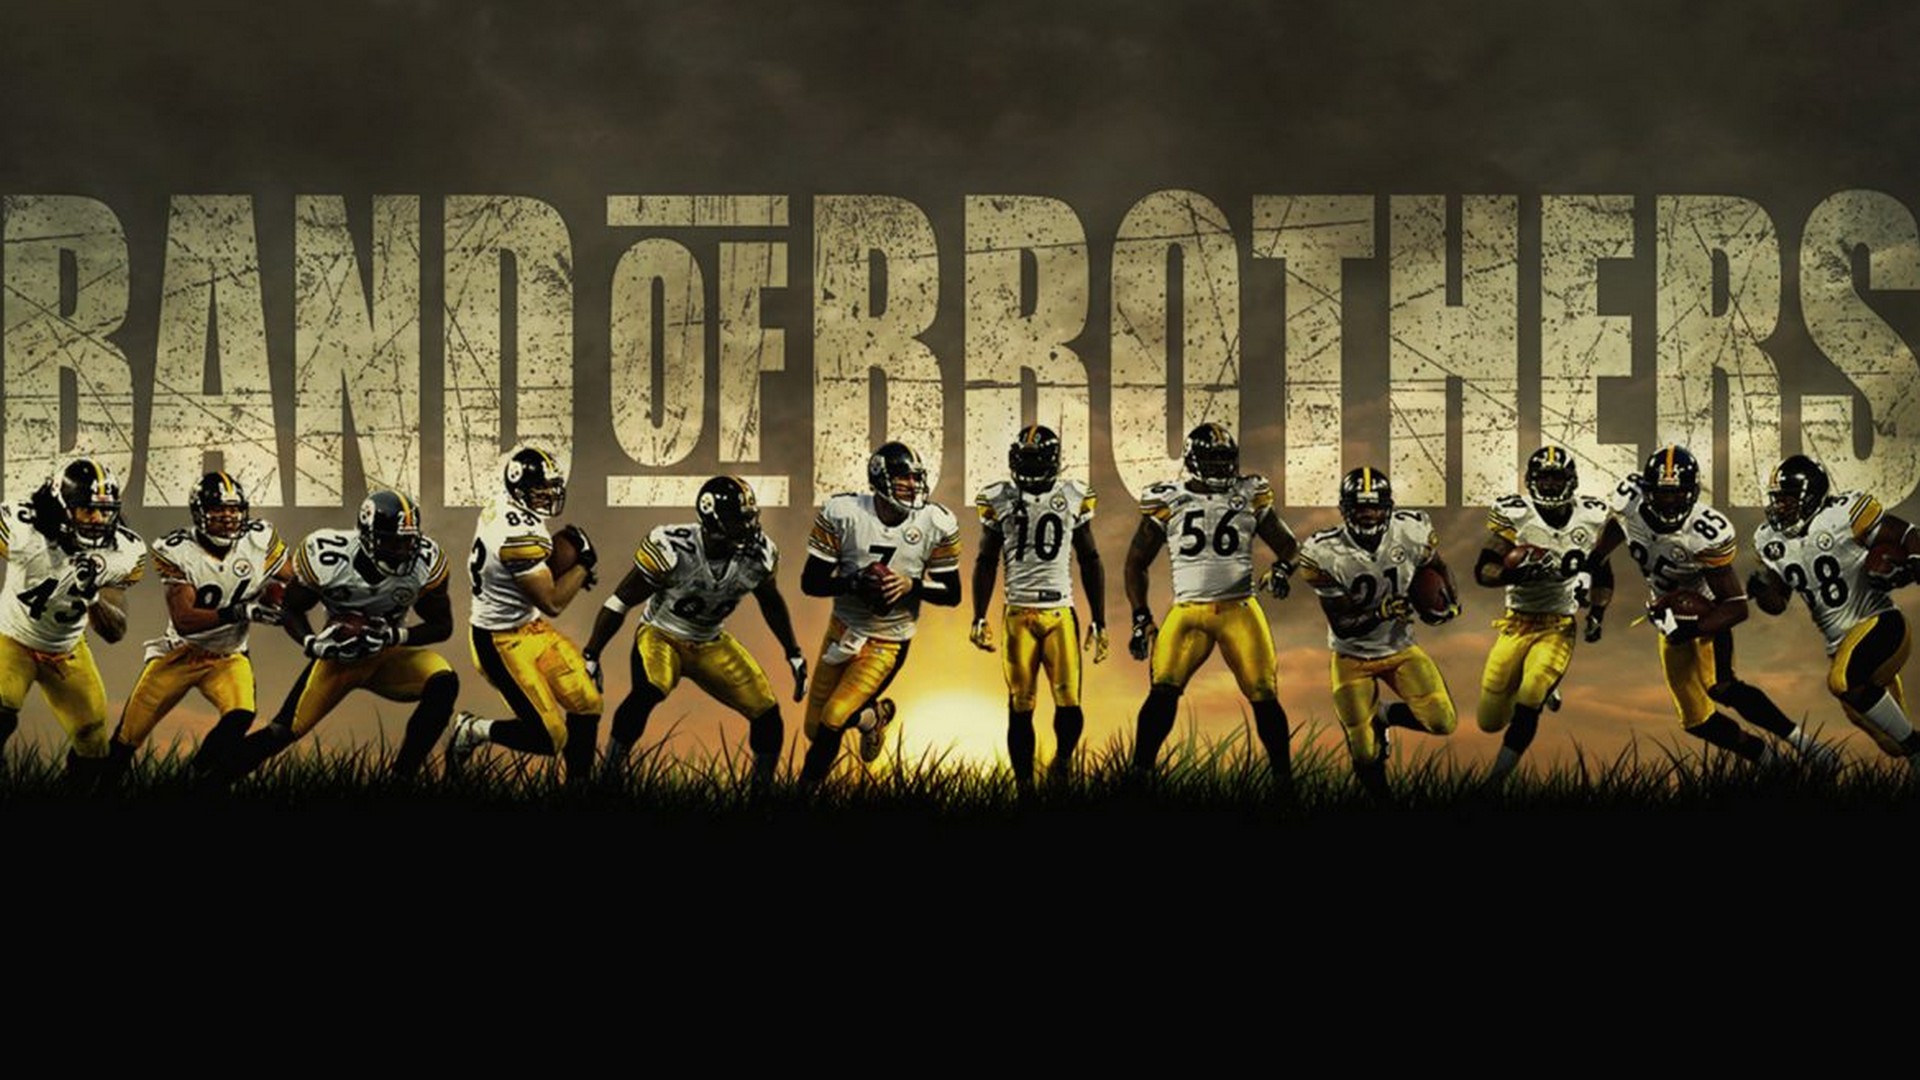 Pittsburgh Steelers Football For PC Wallpaper With Resolution 1920X1080 pixel. You can make this wallpaper for your Mac or Windows Desktop Background, iPhone, Android or Tablet and another Smartphone device for free